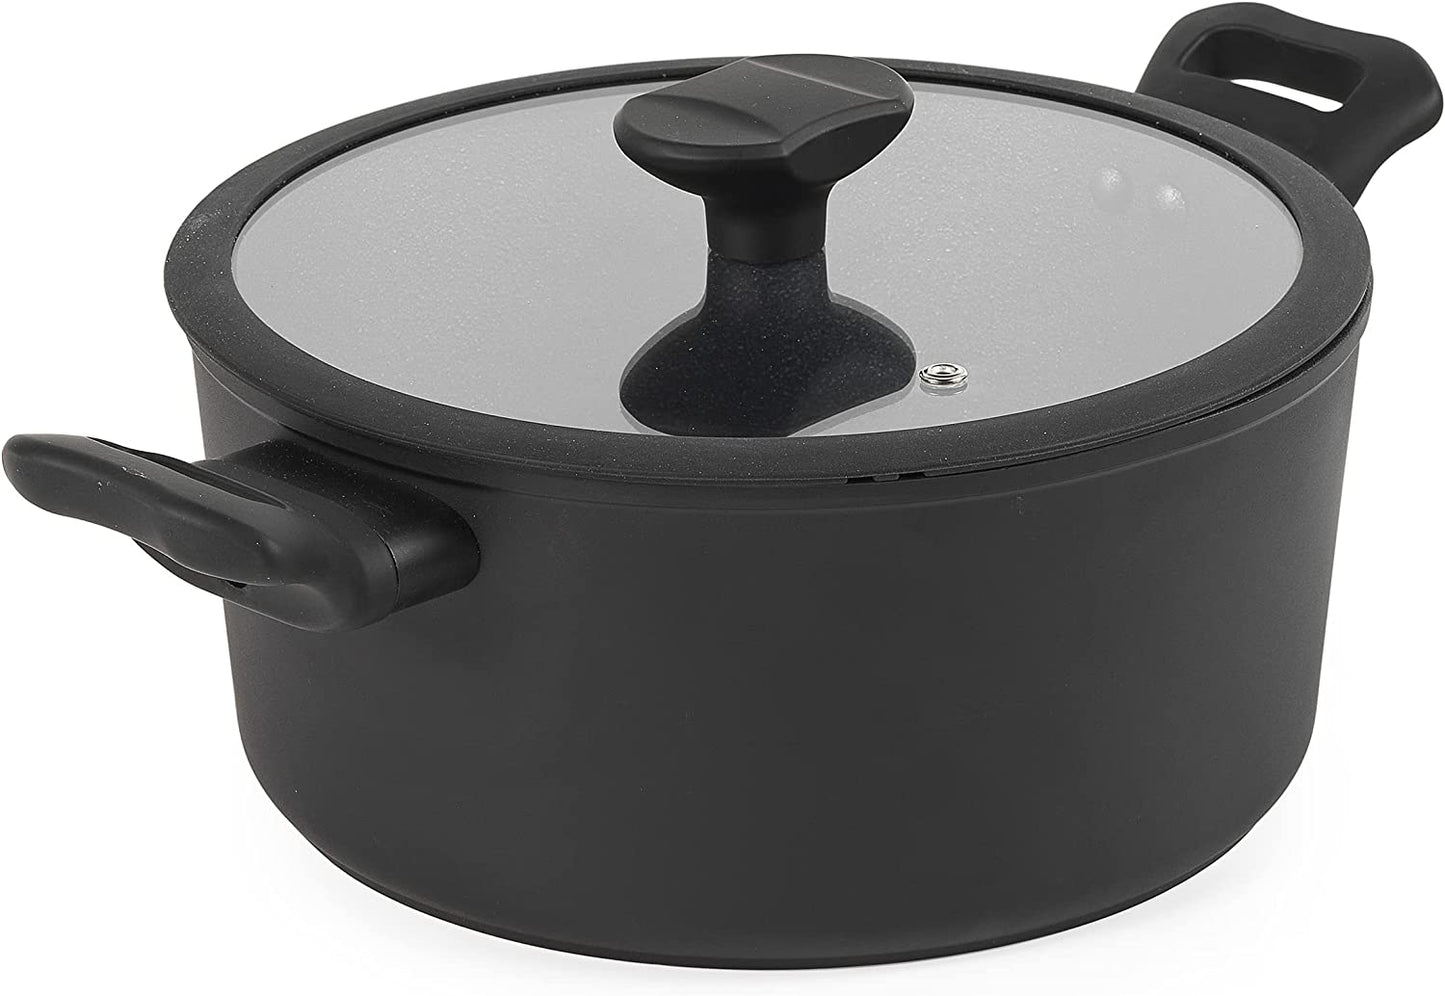 Tall pot with non-stick coating, Russell Hobbs RH01864EU7 Crystaltech, 24cm